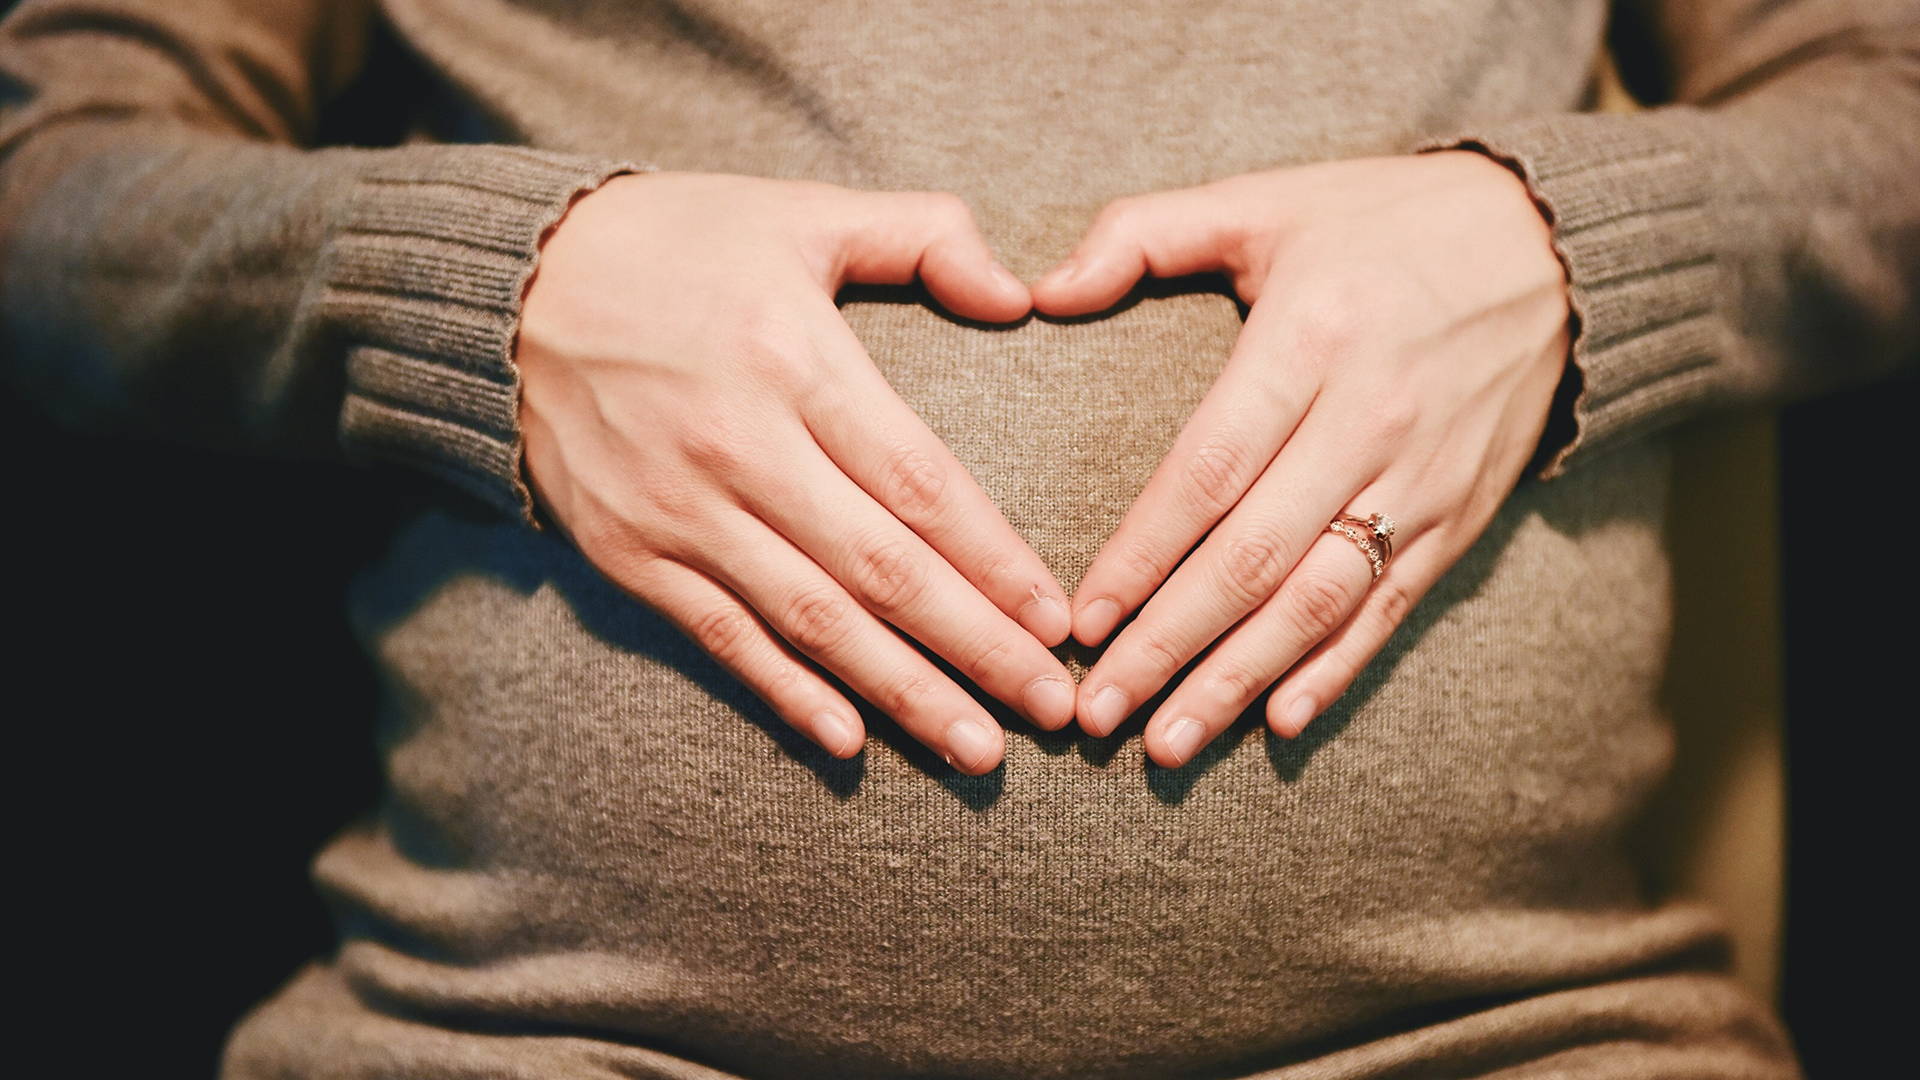 CBD and Pregnancy: Should Expecting and New Mothers Take CBD Oil?